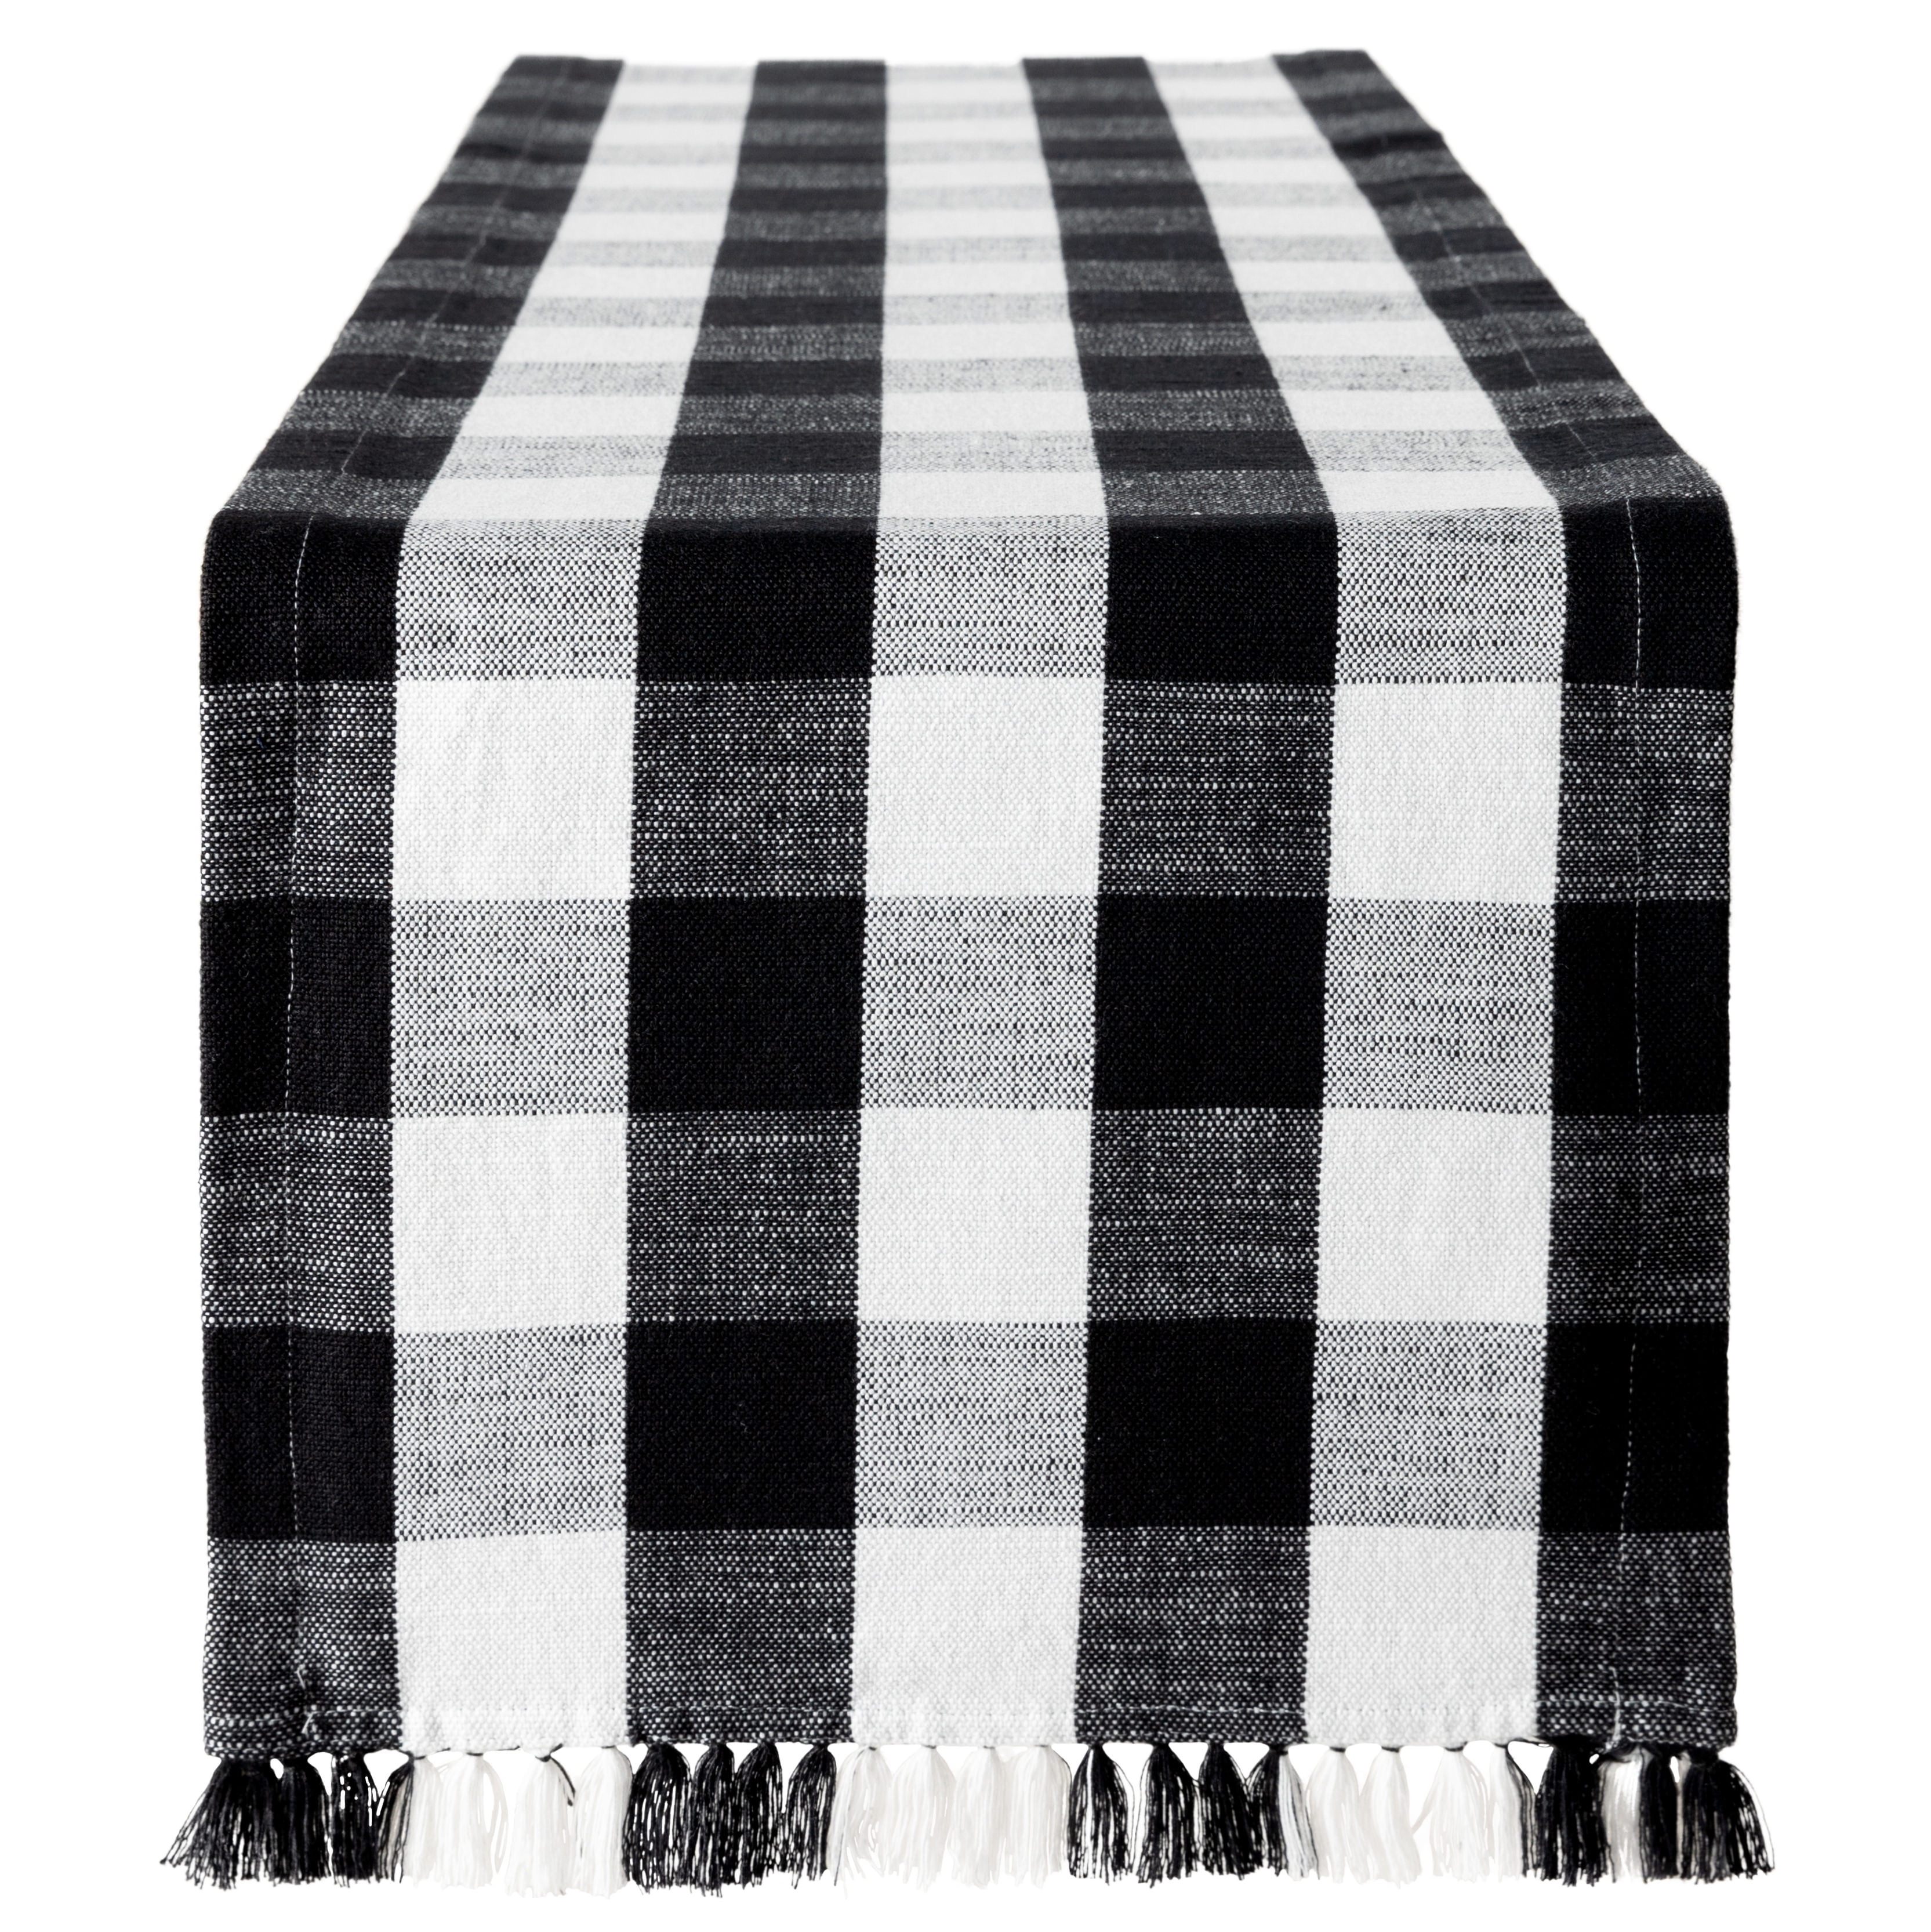 Mainstays Buffalo Plaid Woven Cotton Runner, 1 Piece, Black and White